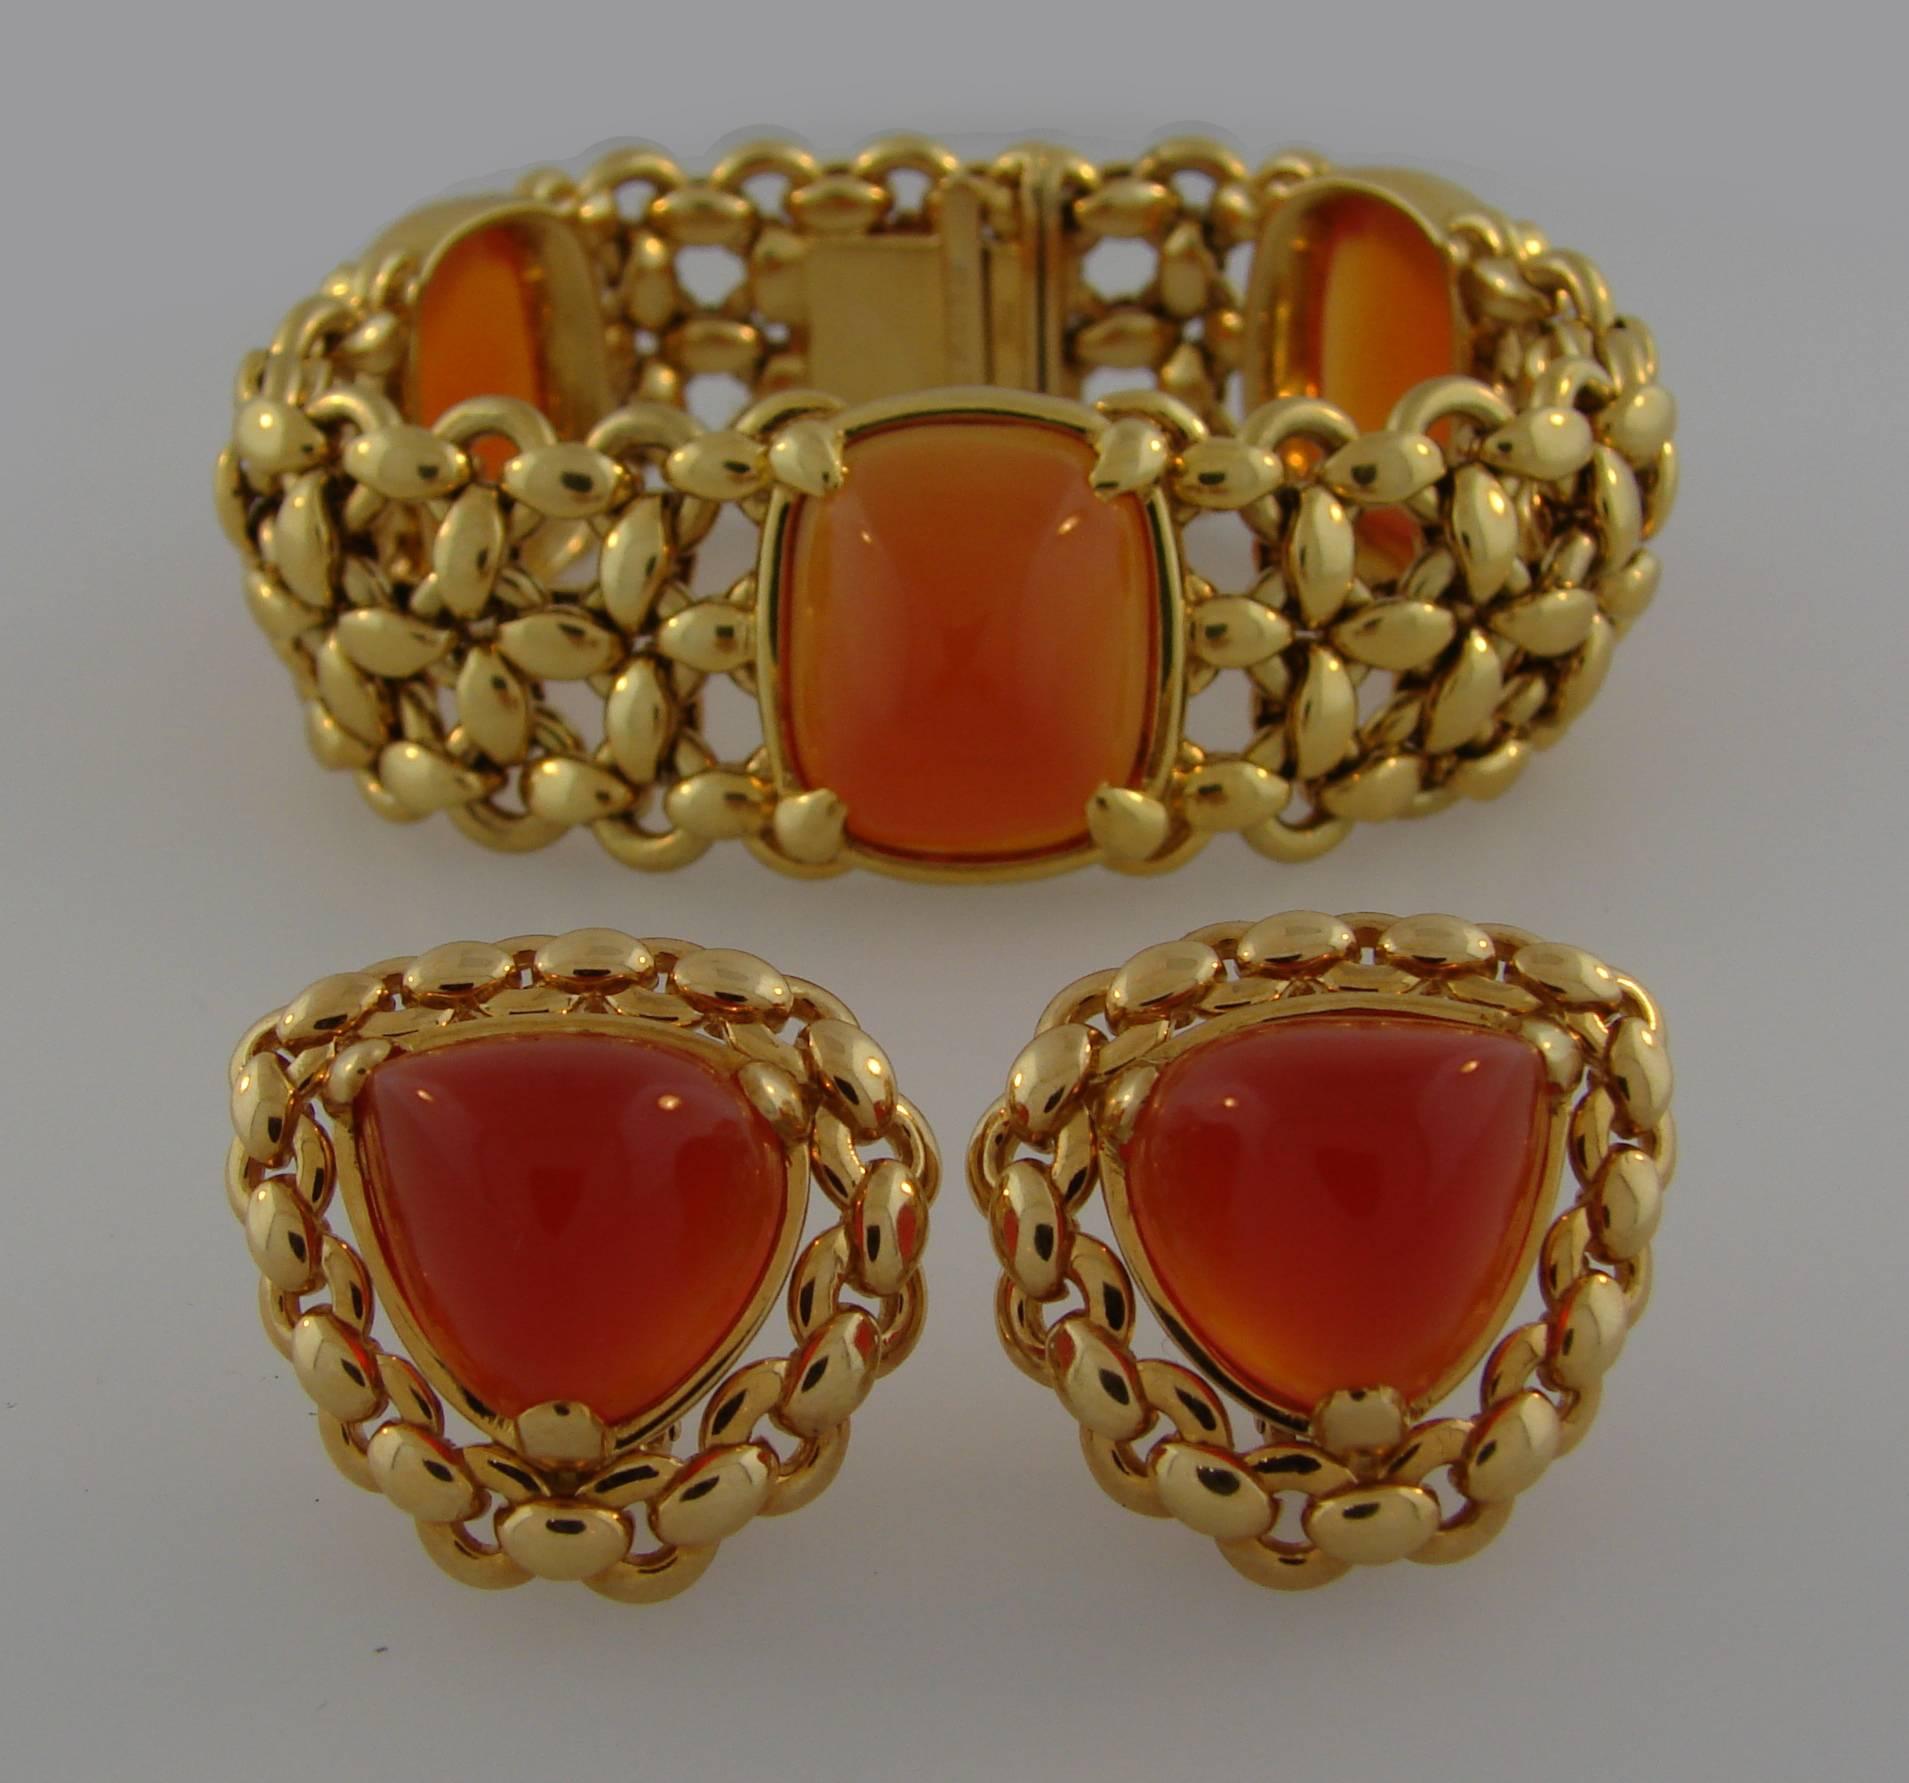 Beautiful classy set consisting of a bracelet and a pair of earrings created by Hermes in France in the 1980's. Elegant, organic and wearable, the set is a great addition to your jewelry collection. 
The color of the carnelian is closer than it